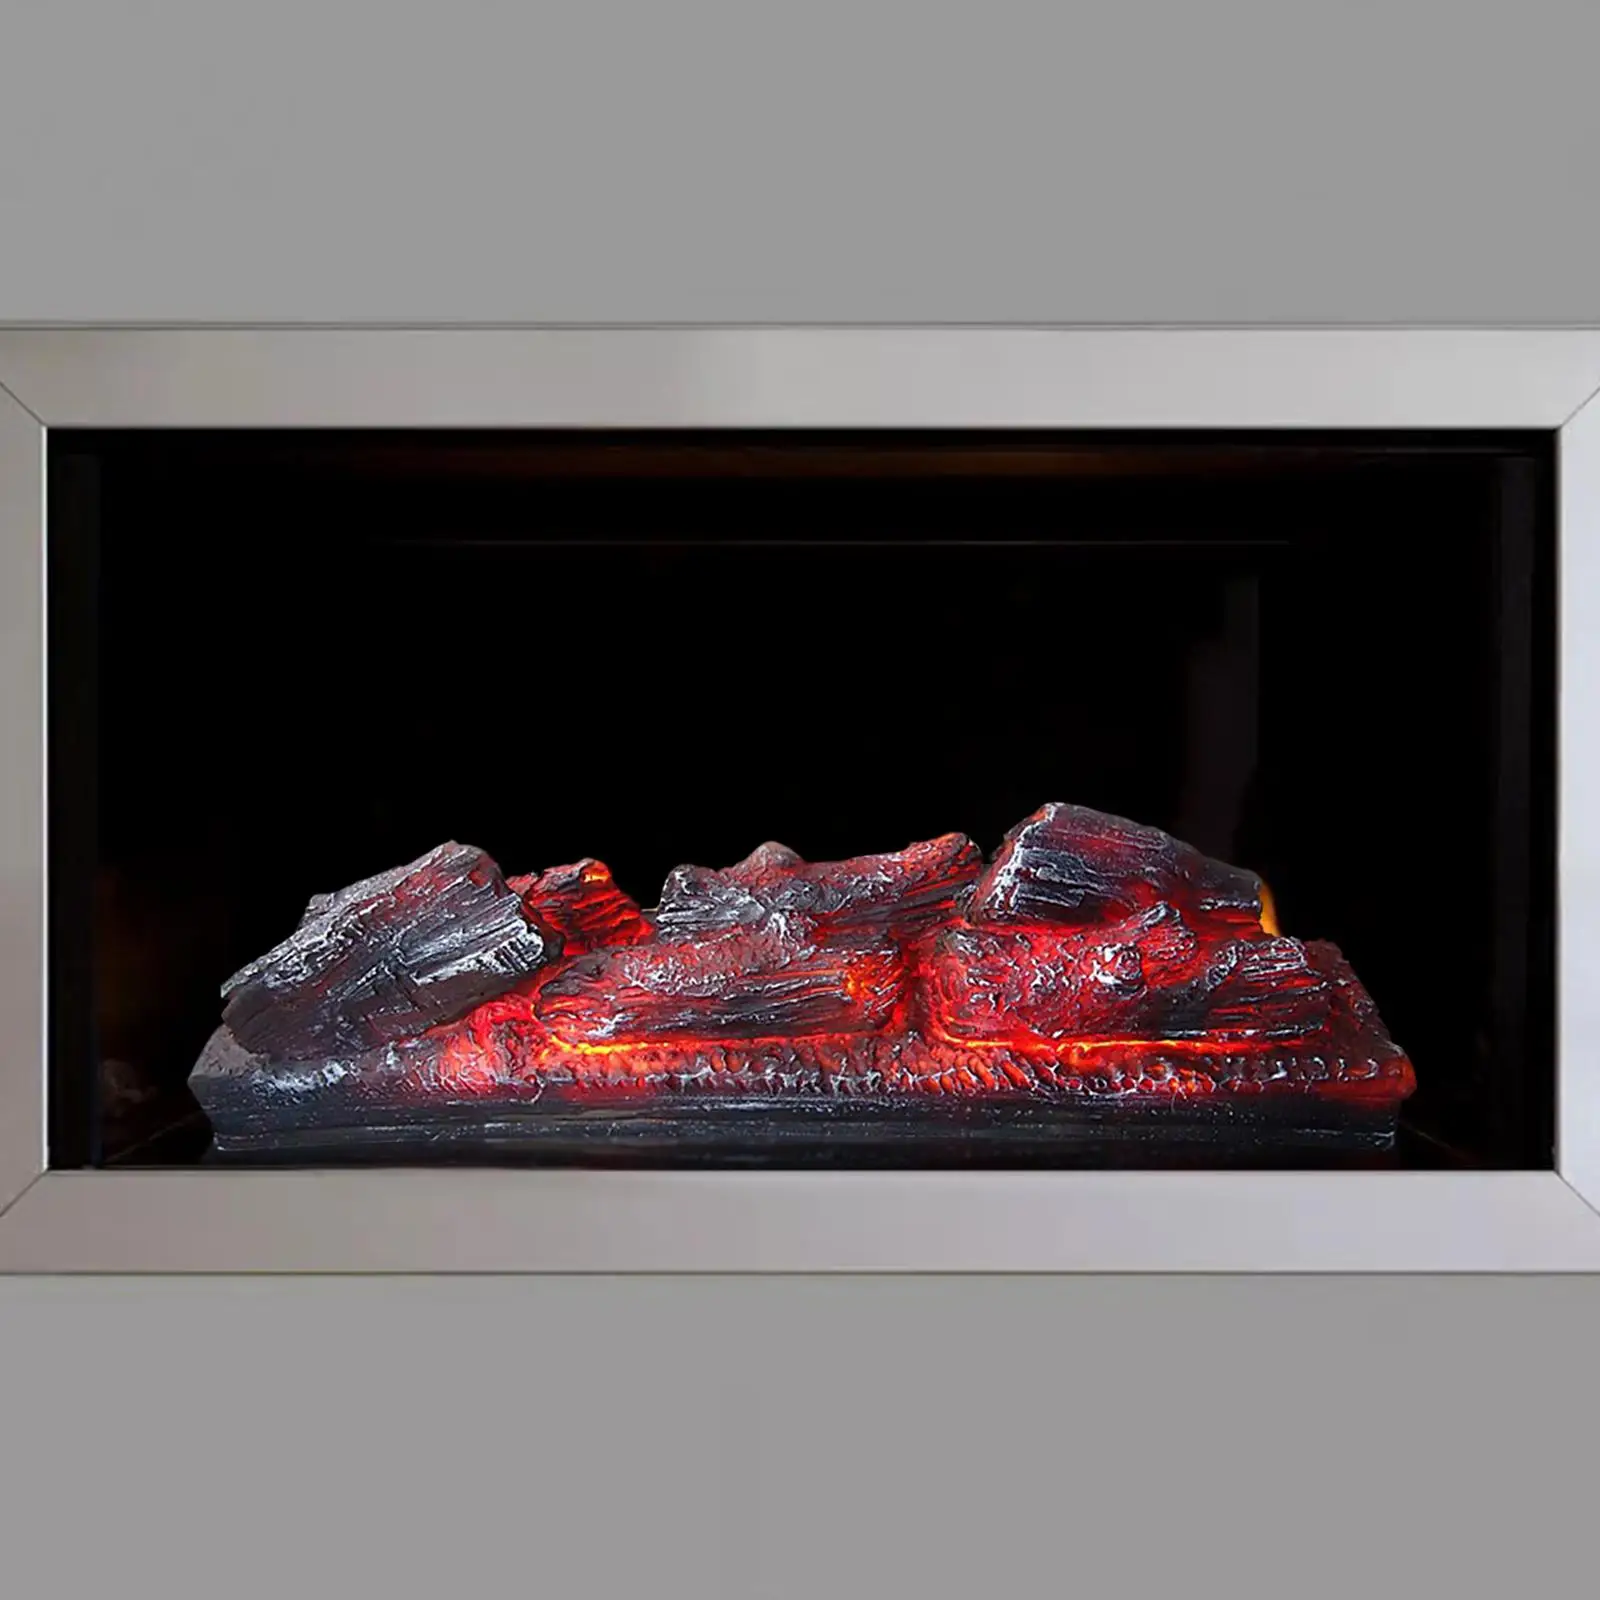 Simulation Electric Fireplace Flame Lamp Resin Firewood for Bedroom Tabletop Indoor Decor